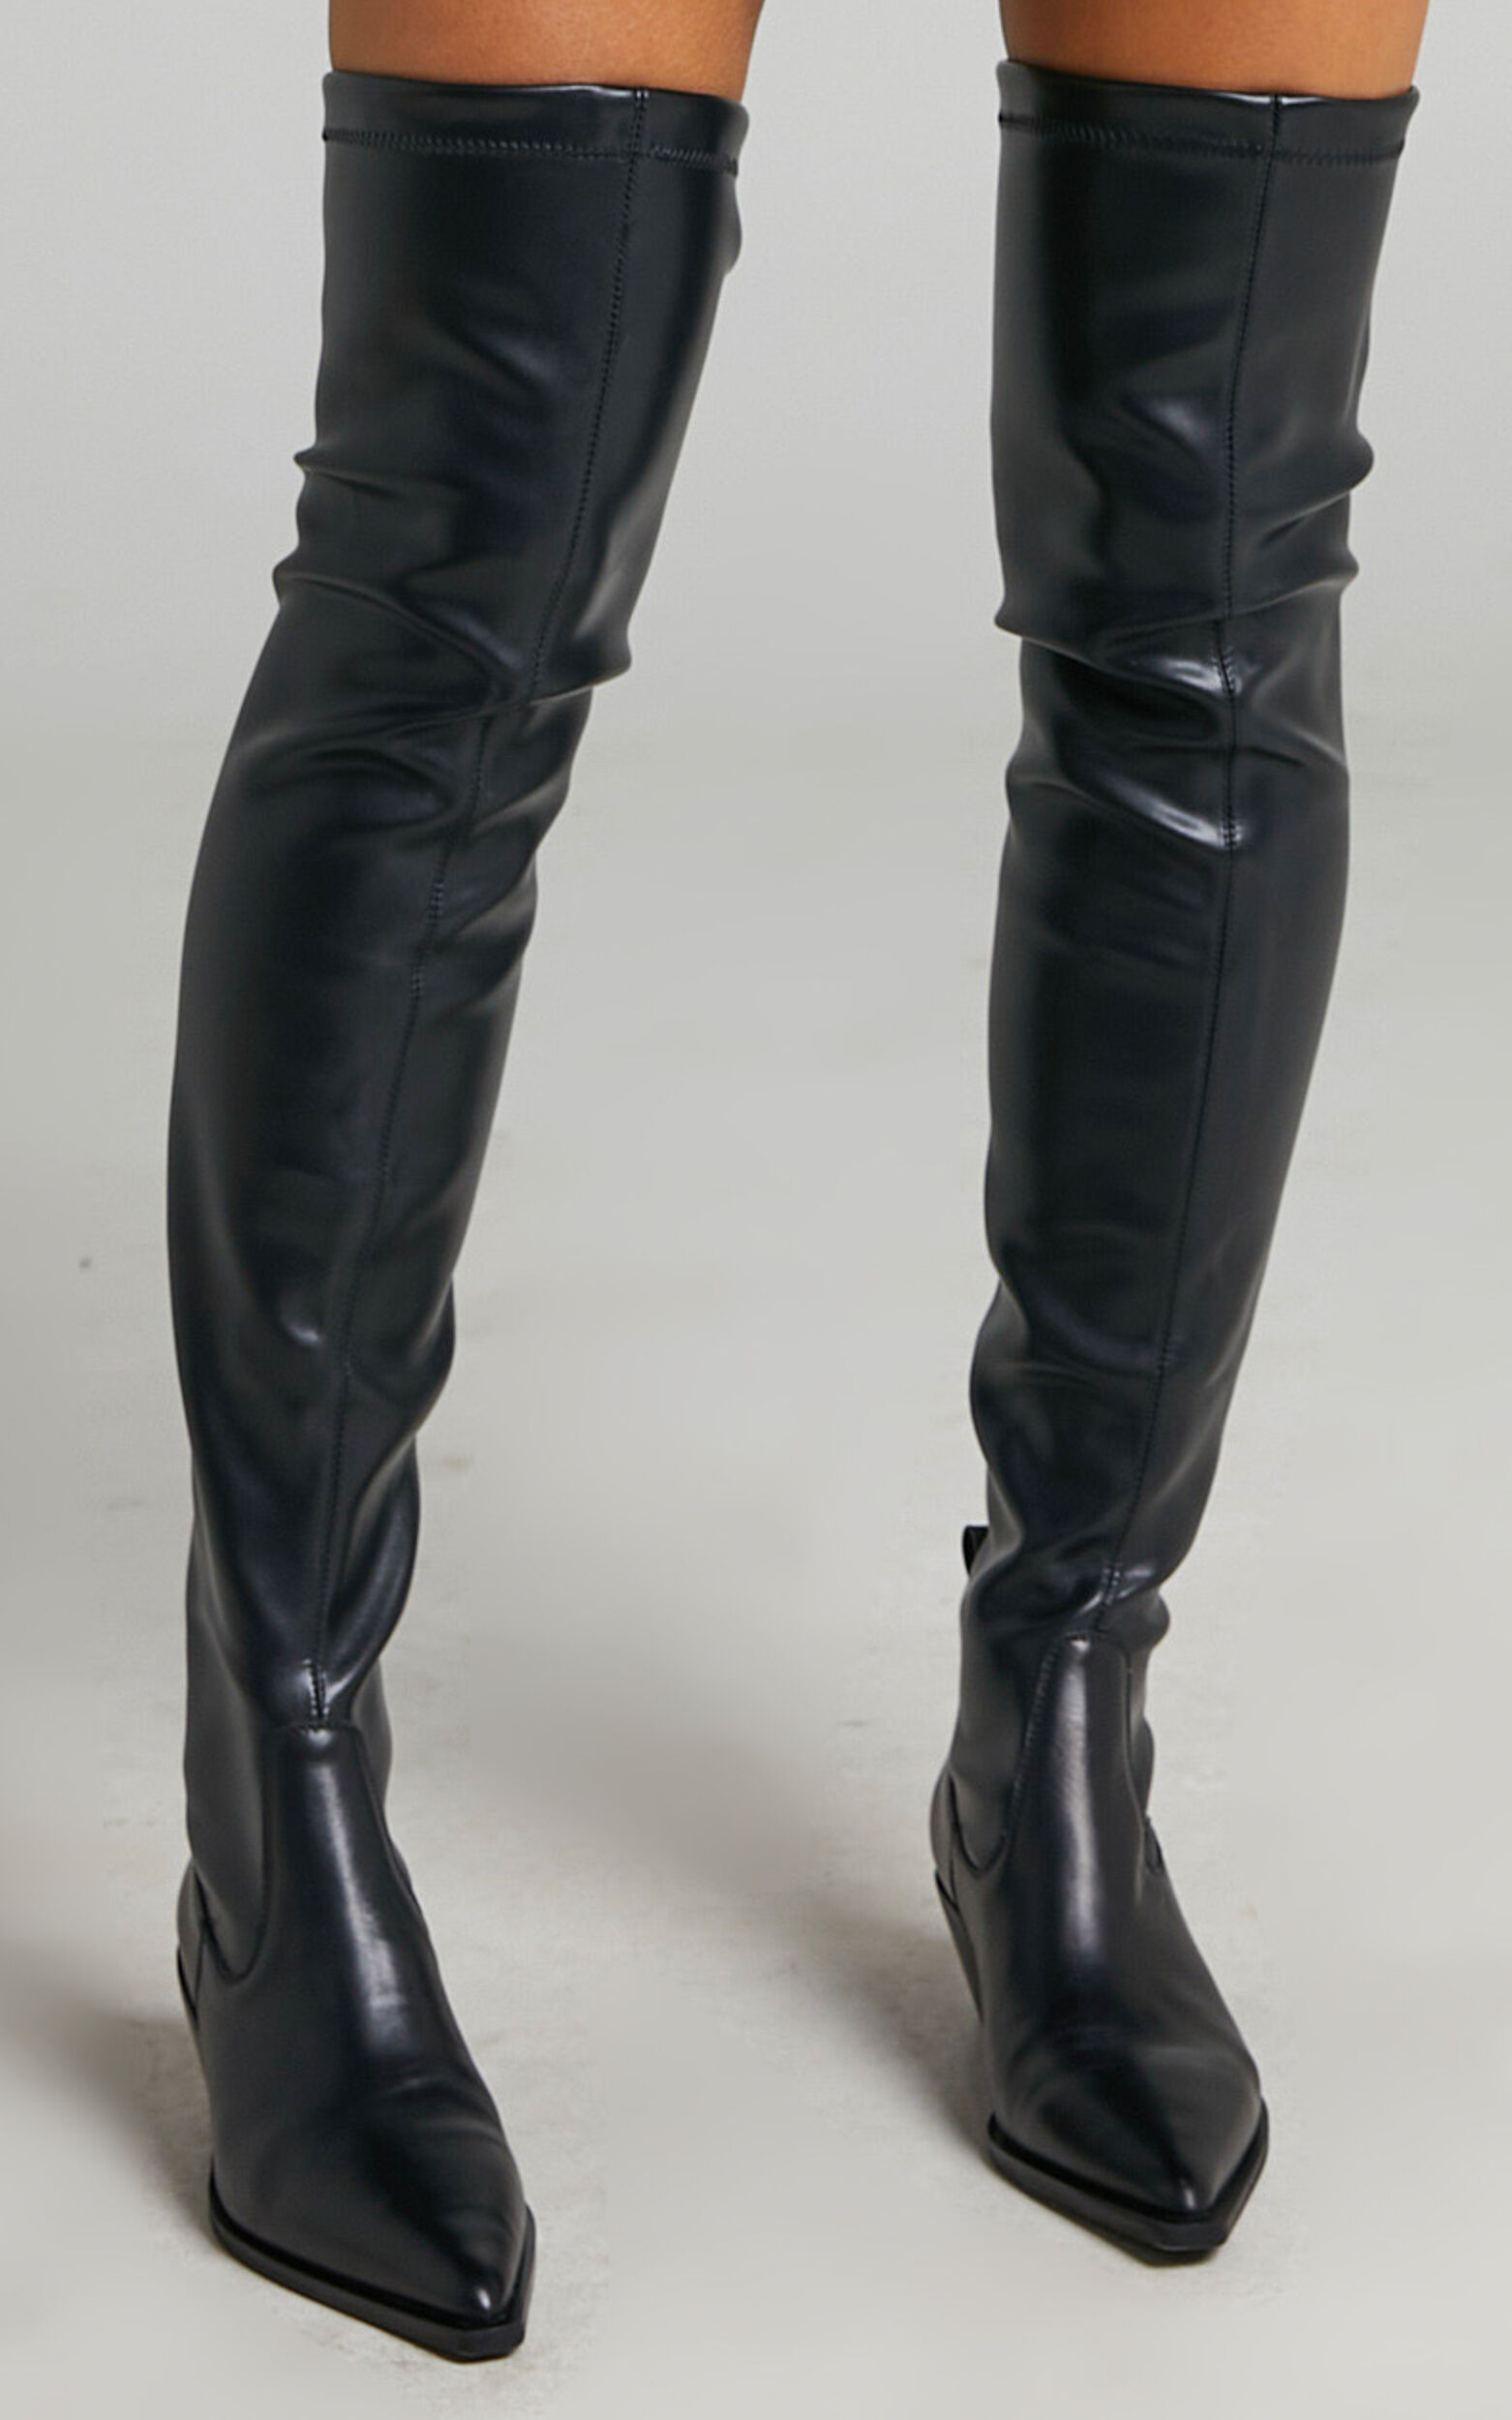 Alias Mae - Fi Boots in Black Stretch - 05, BLK1, super-hi-res image number null